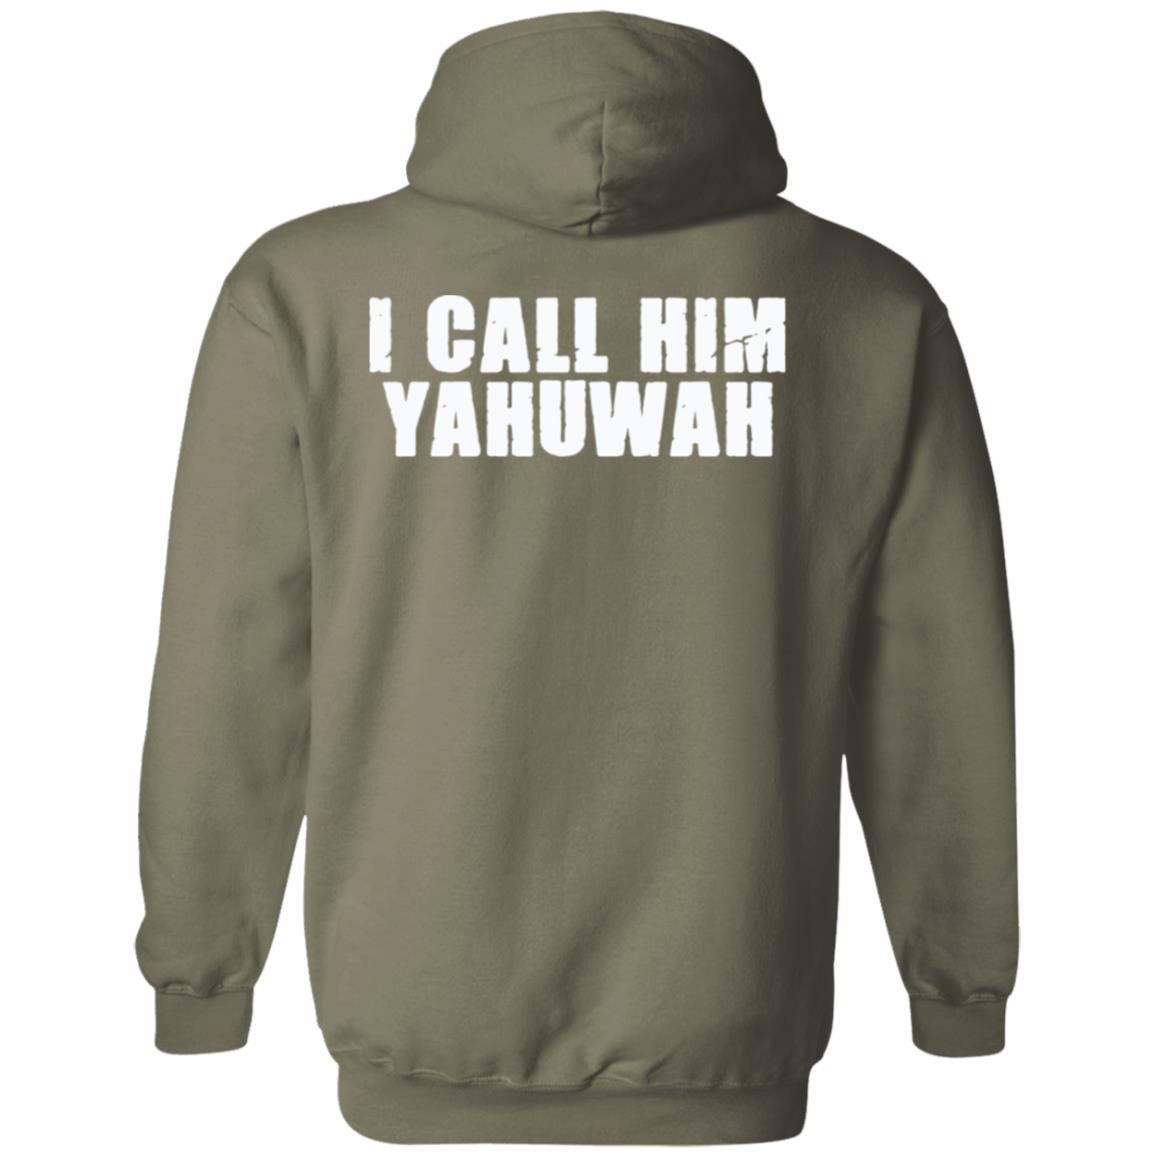 I KNOW MY FATHER Pullover Hoodie For Him For Her YAH